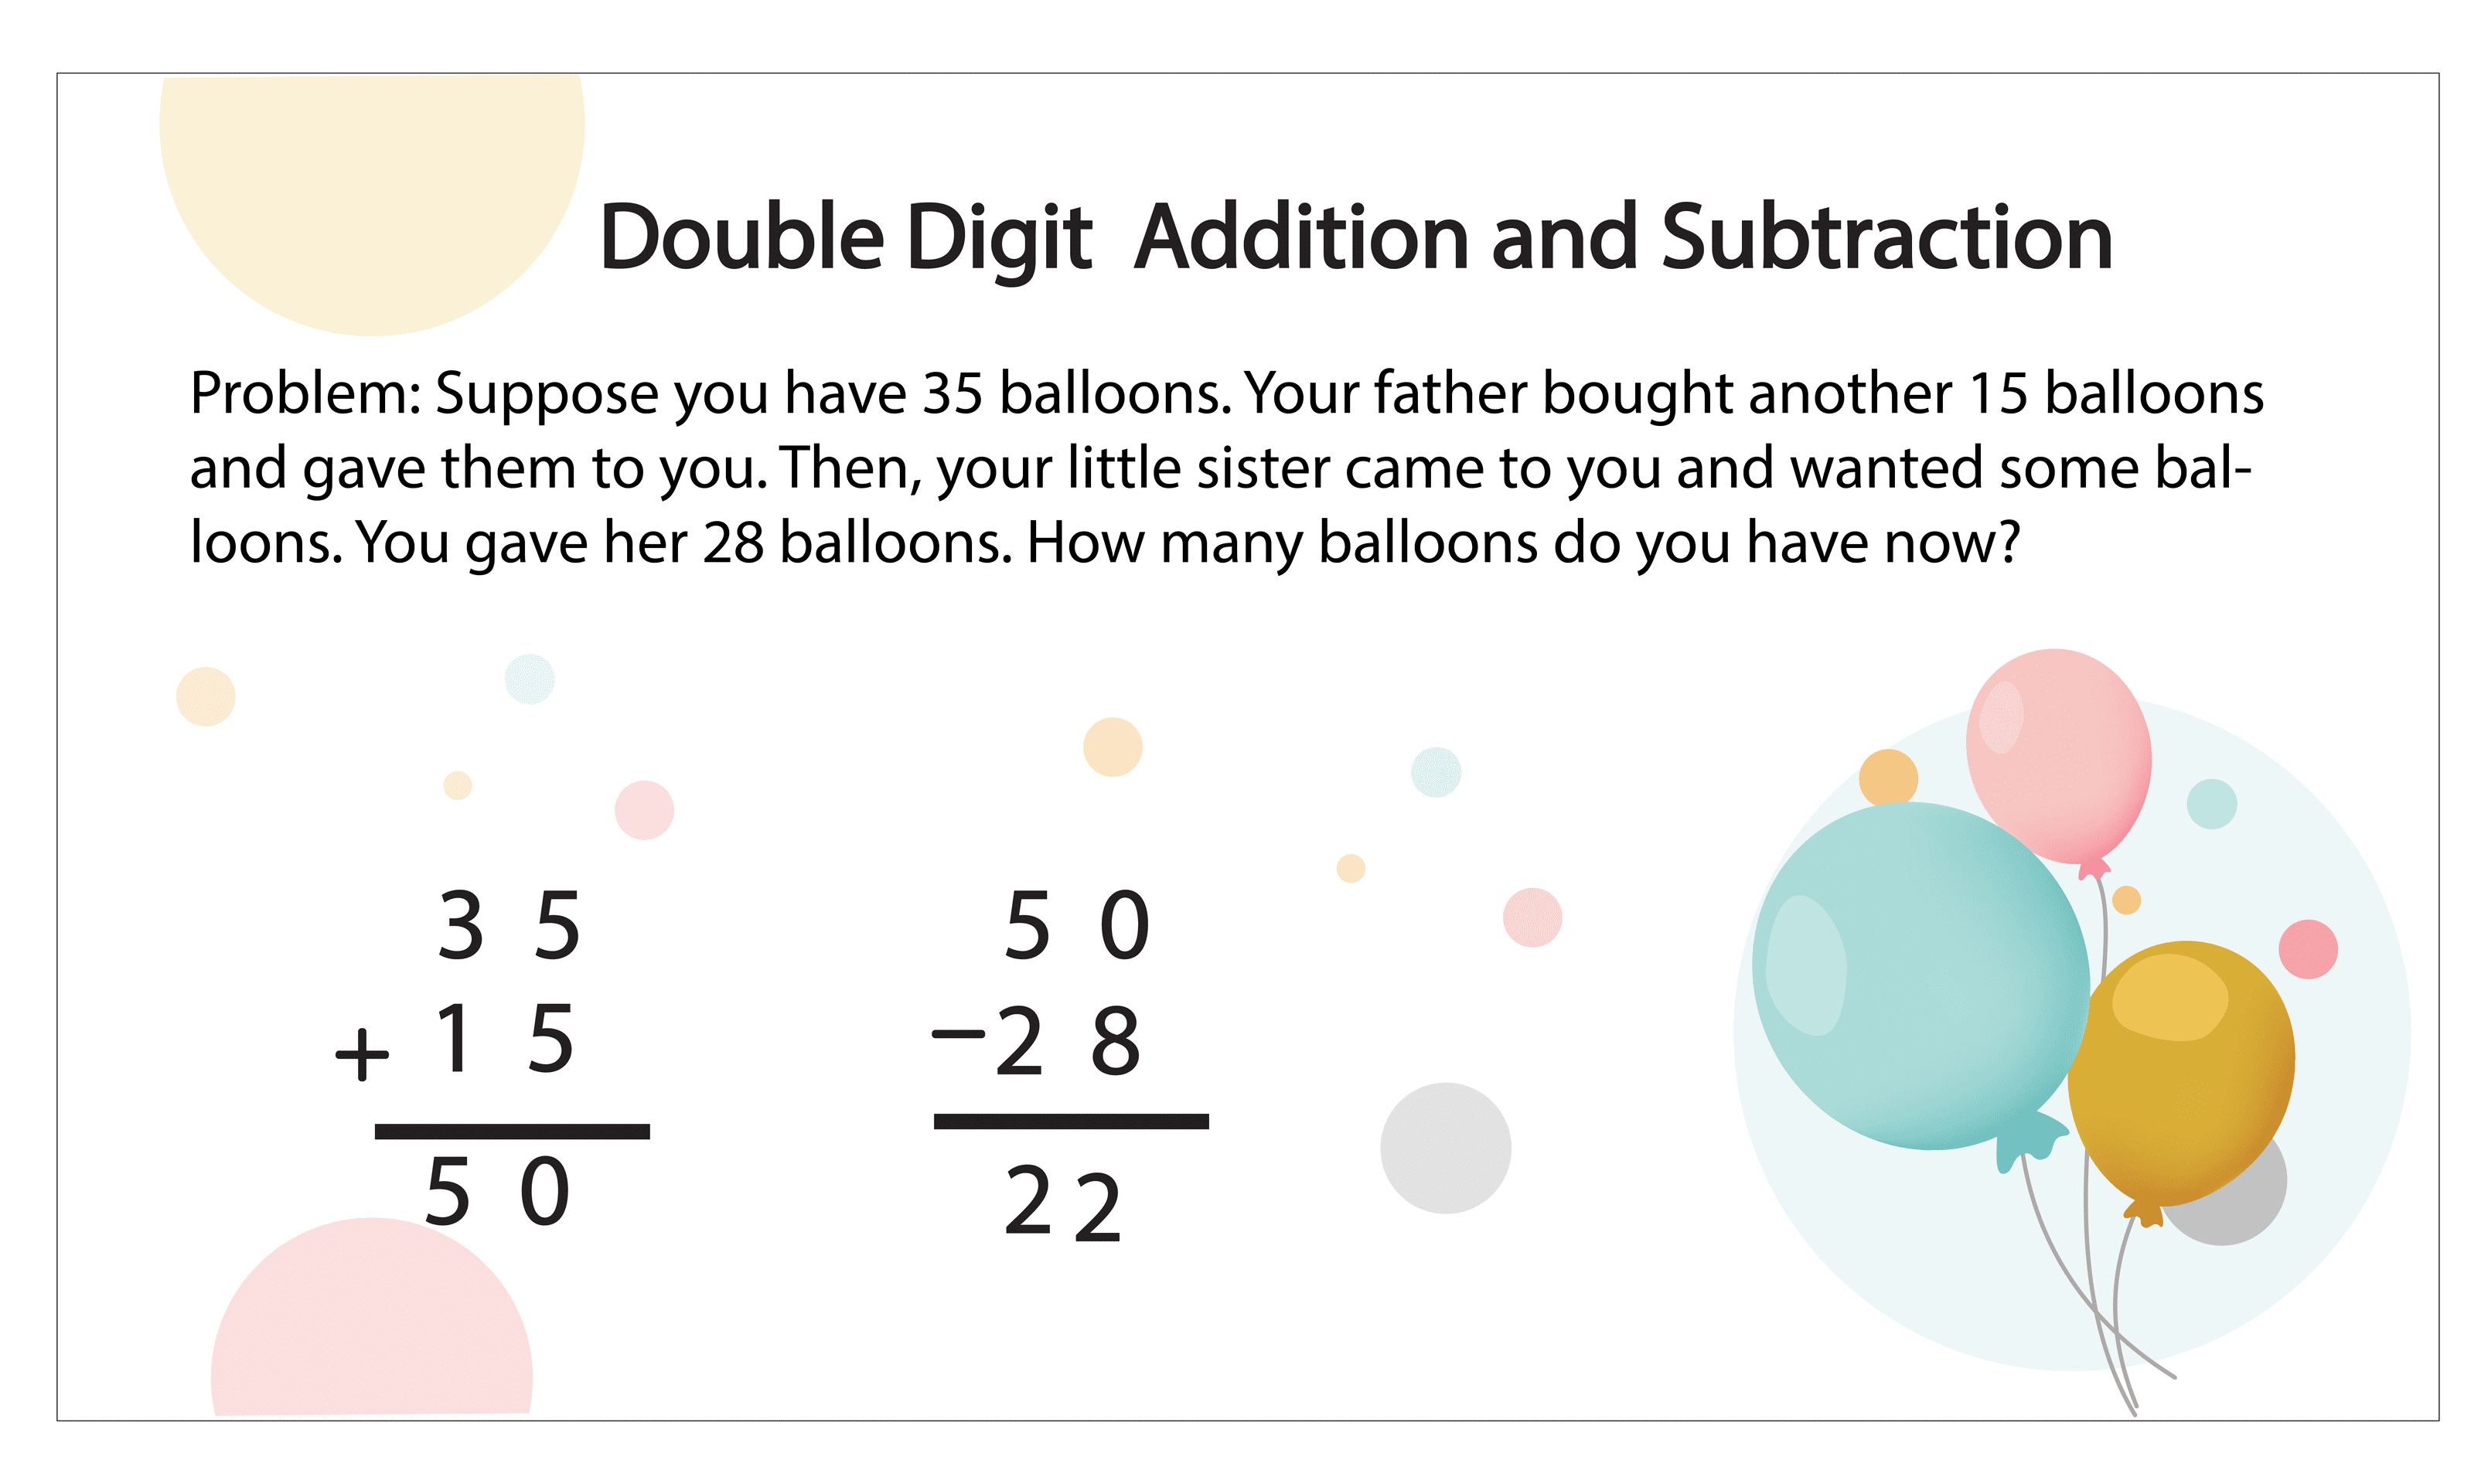 Double digit addition and subtraction